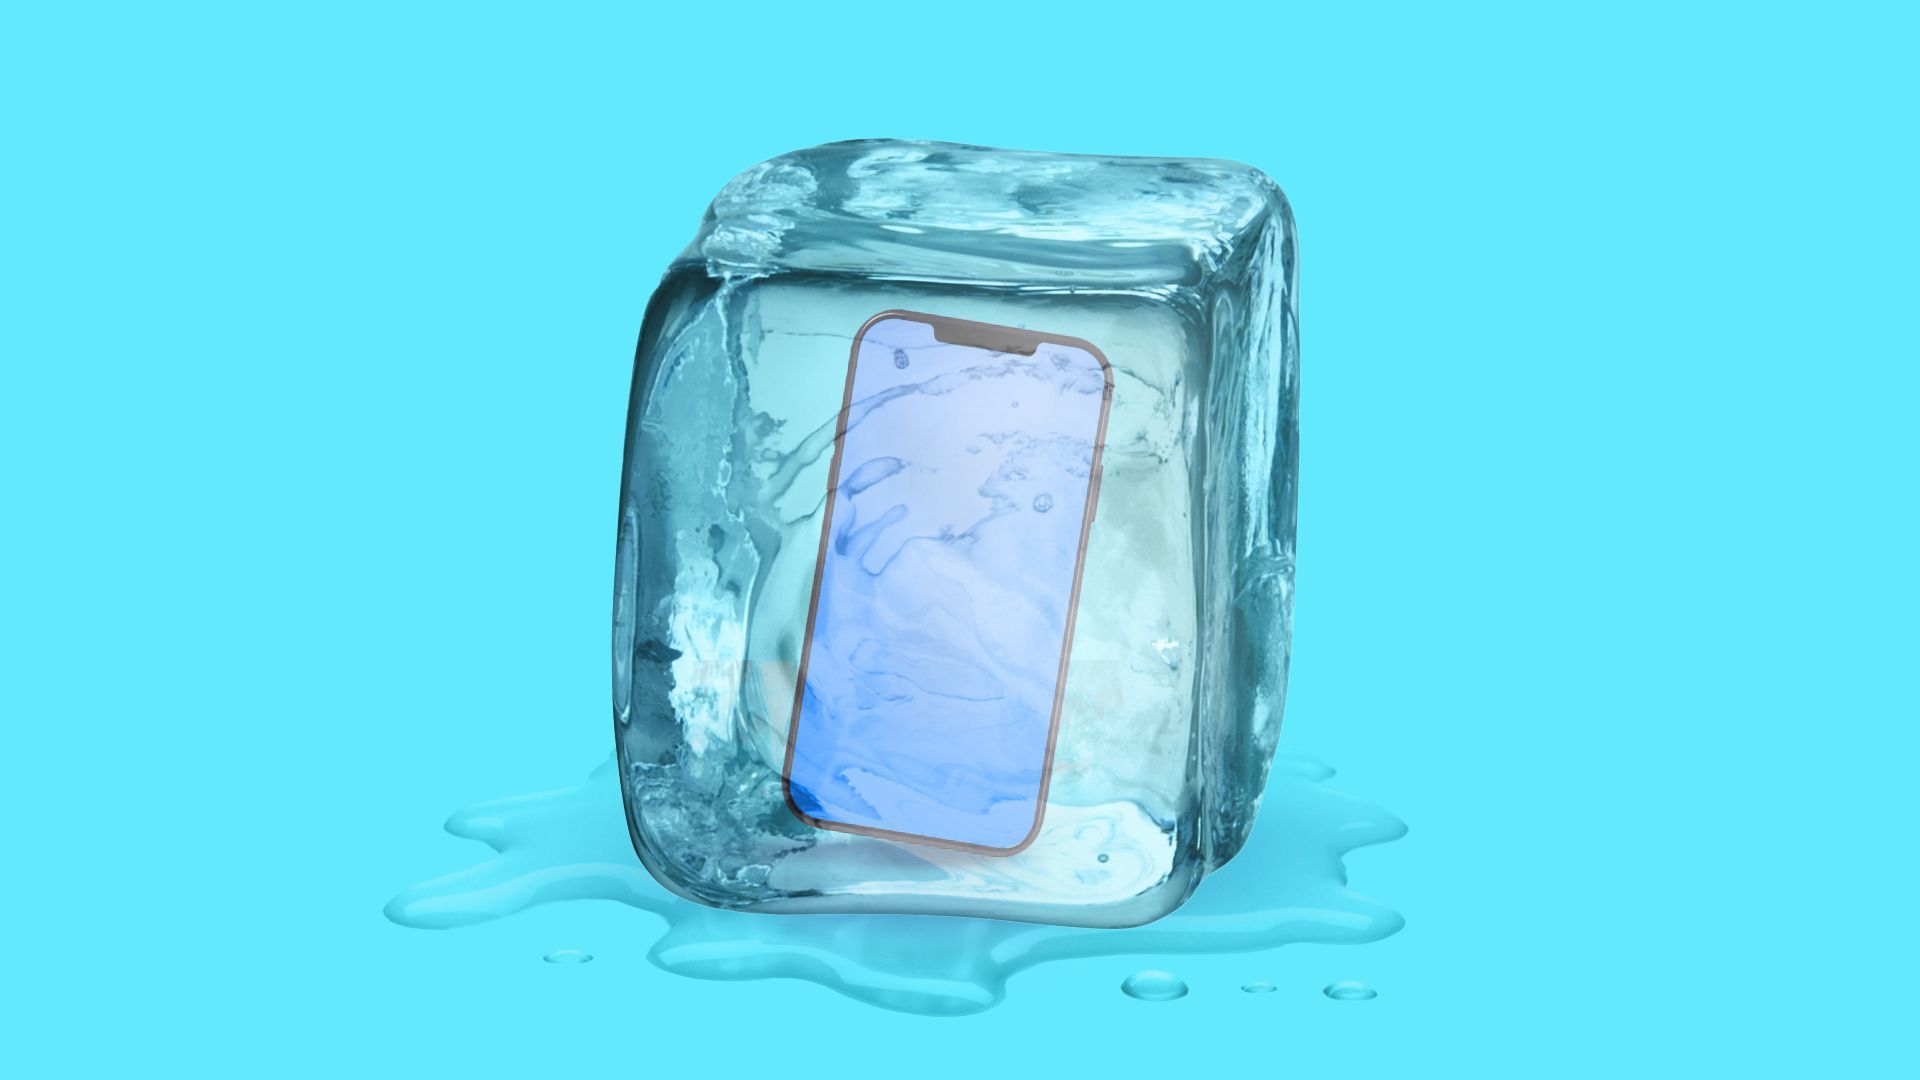 Illustration of a cell phone frozen in an ice cube